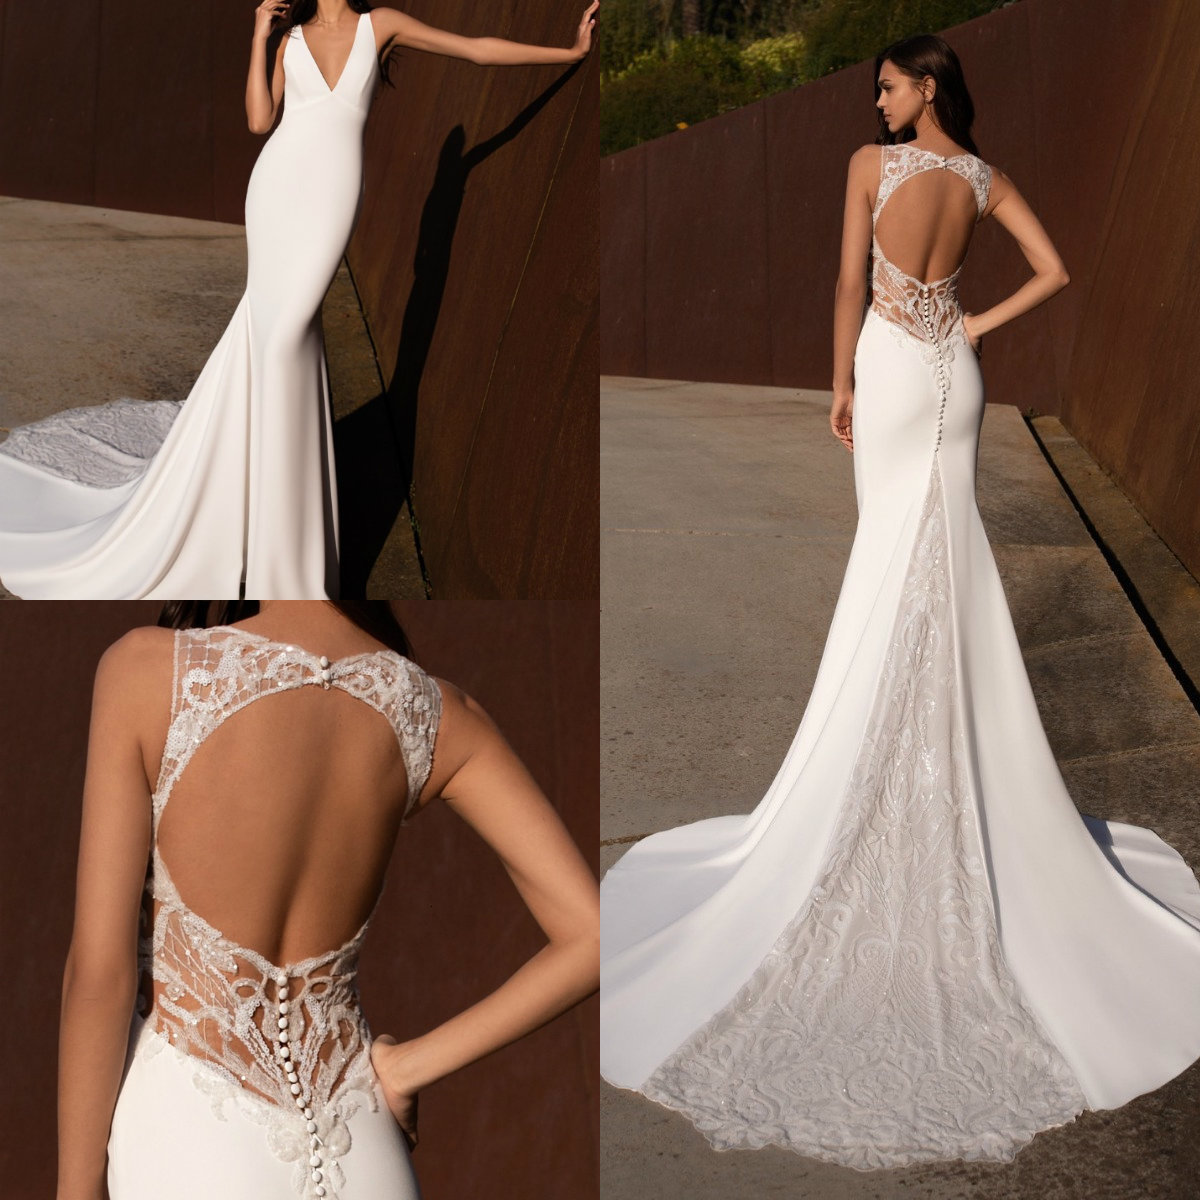 

Plunging V Neck Mermaid Wedding Dresses Keyhole Back Lace Sequined Beach Wedding Gowns with Illusion Details Sexy robes de mariée, Custom made from color chart